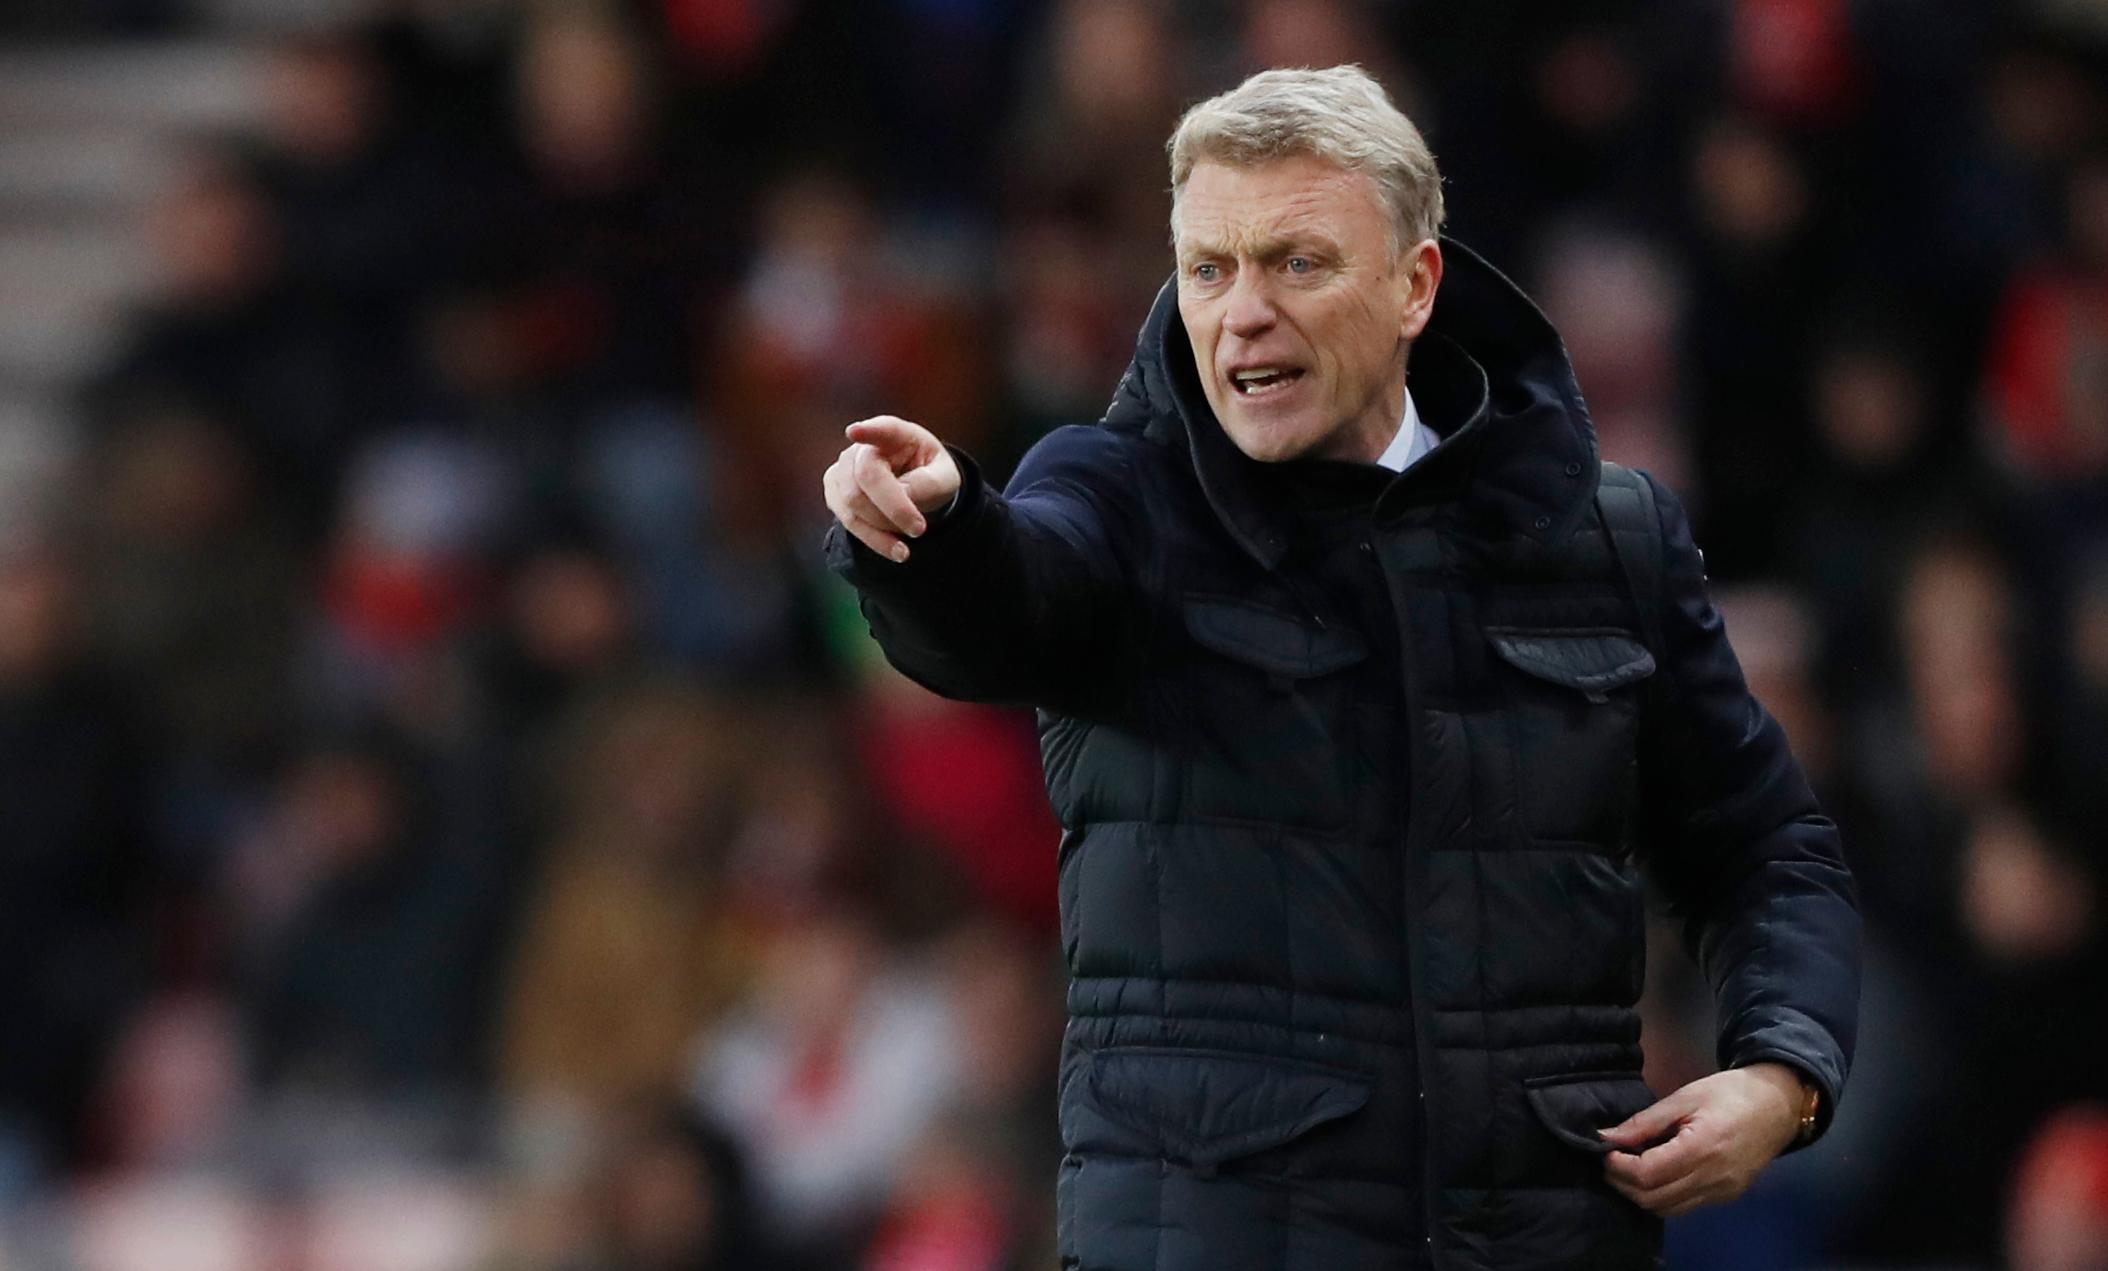 Europa League: Sevilla Will Be Difficult Game For West Ham –Moyes